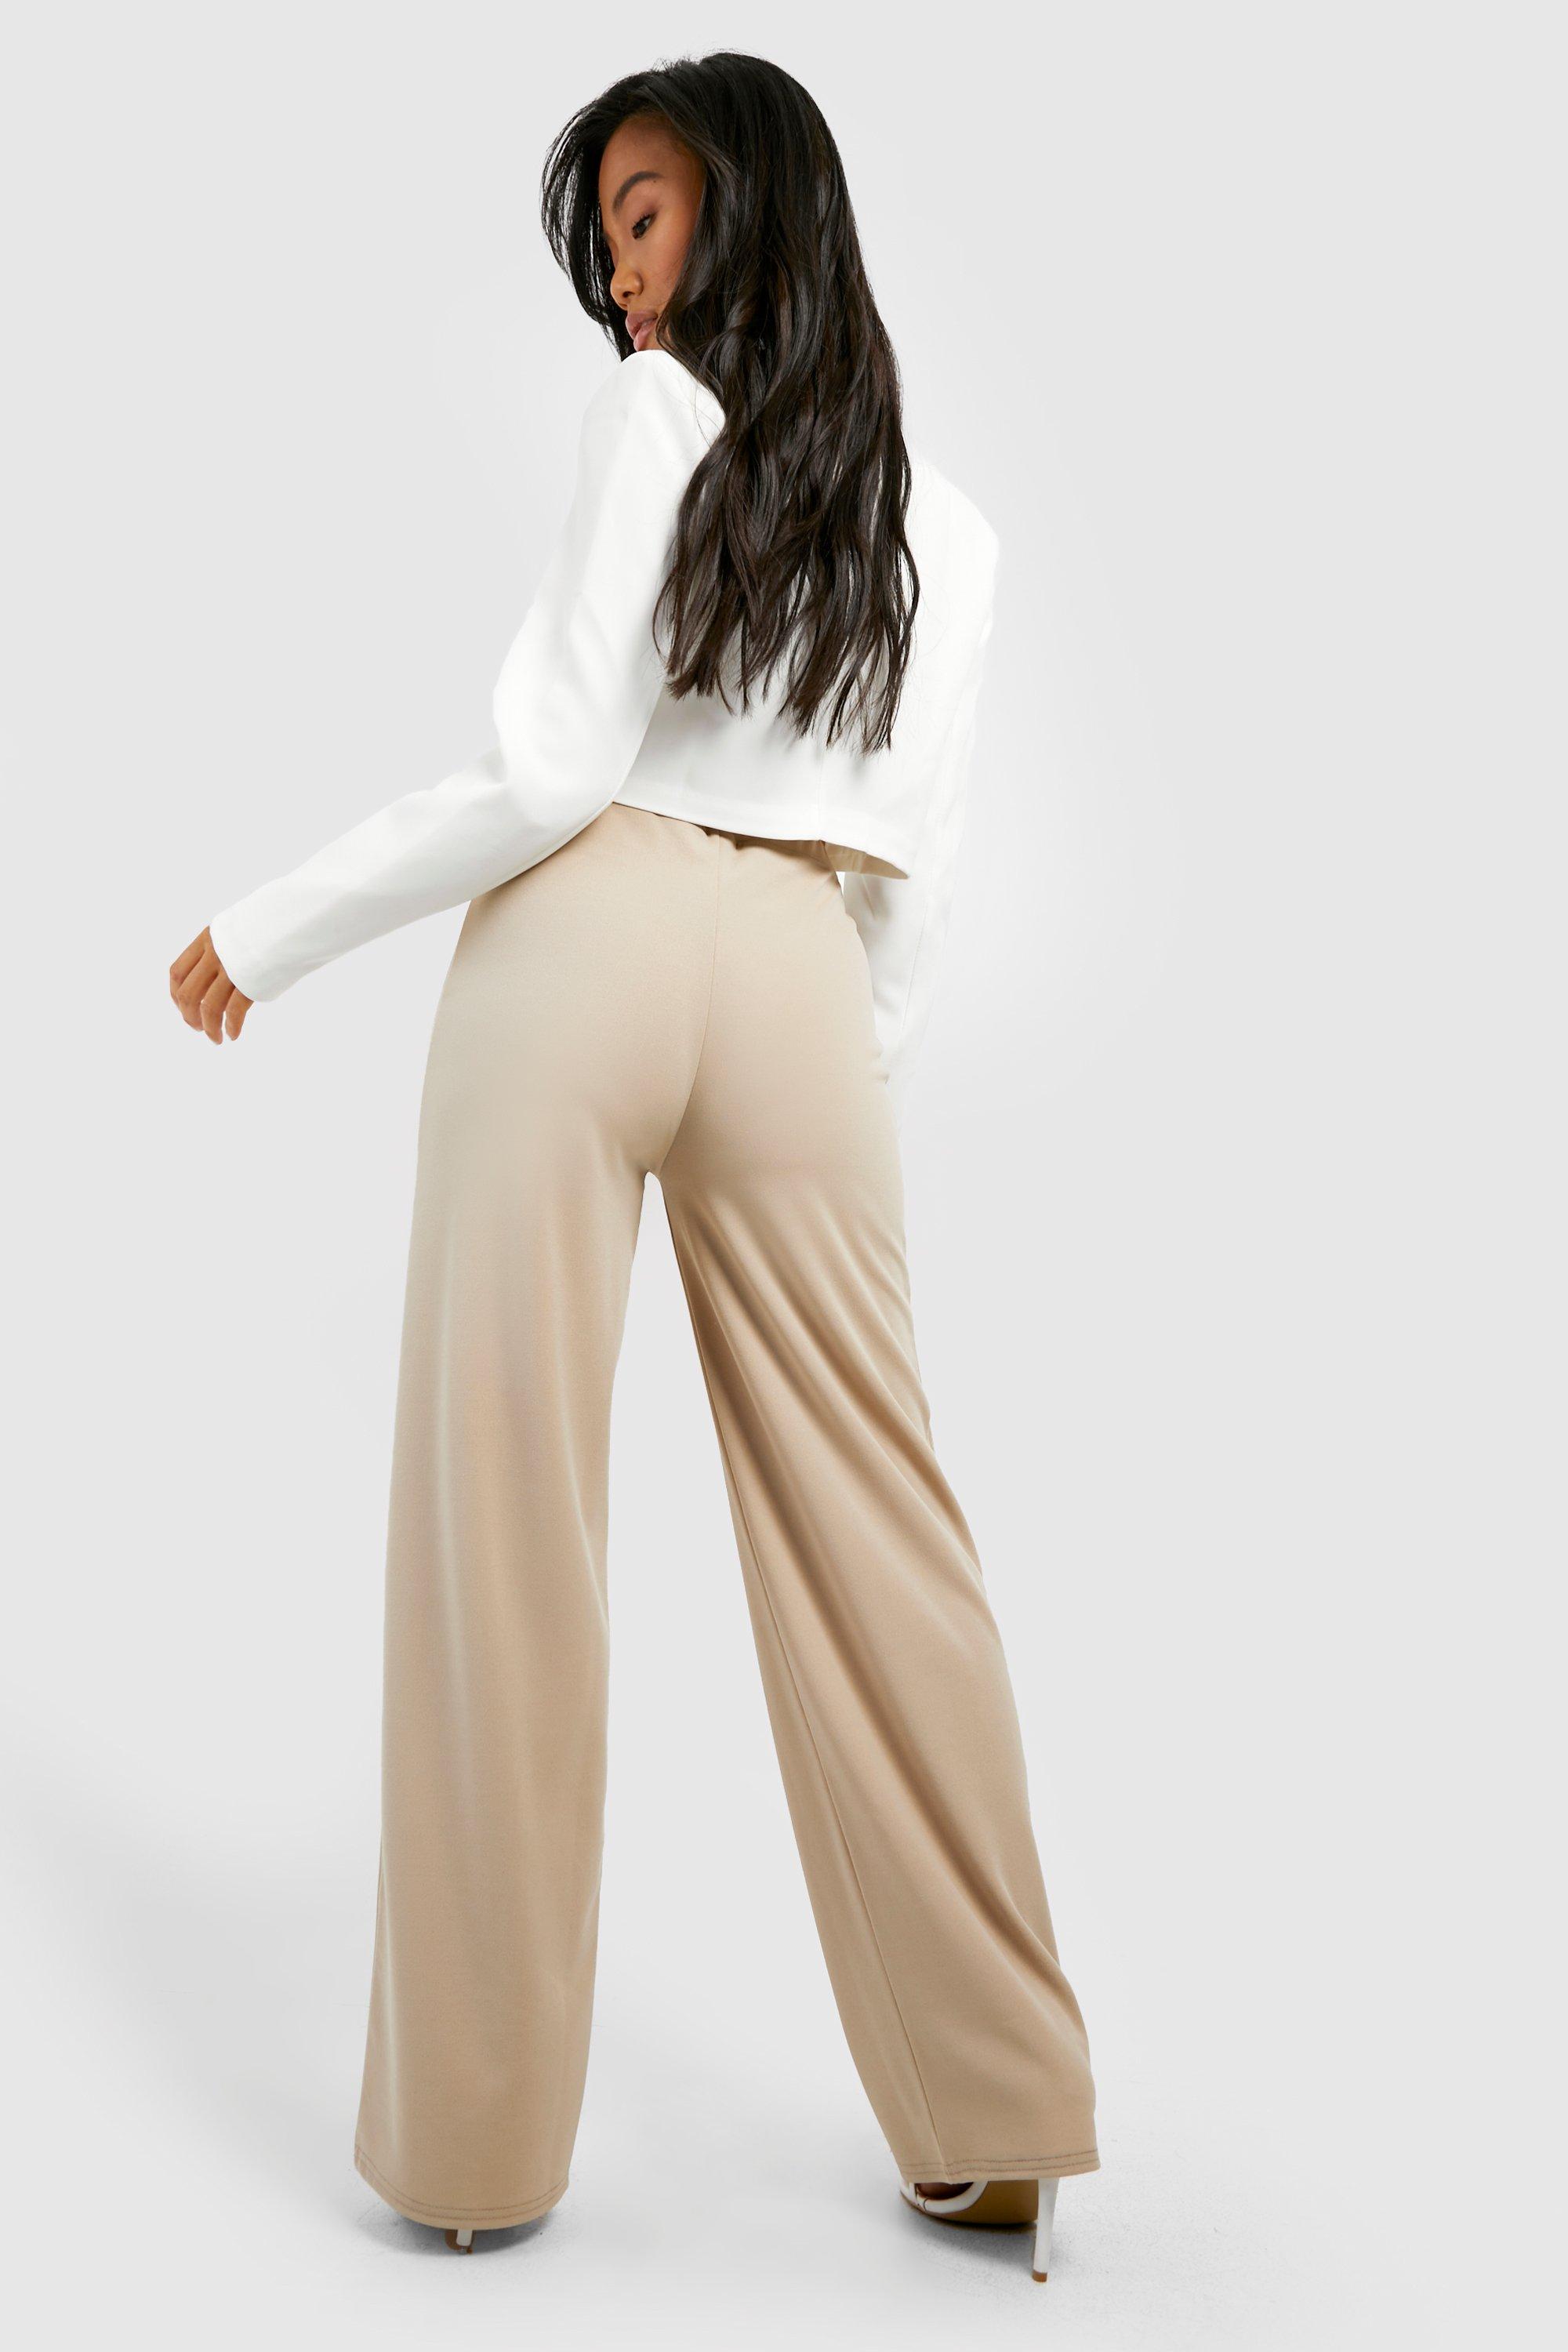 New PETITE Women HIGH Waist RIBBED Elasticated WIDE LEG Stretch LADIES  Trousers